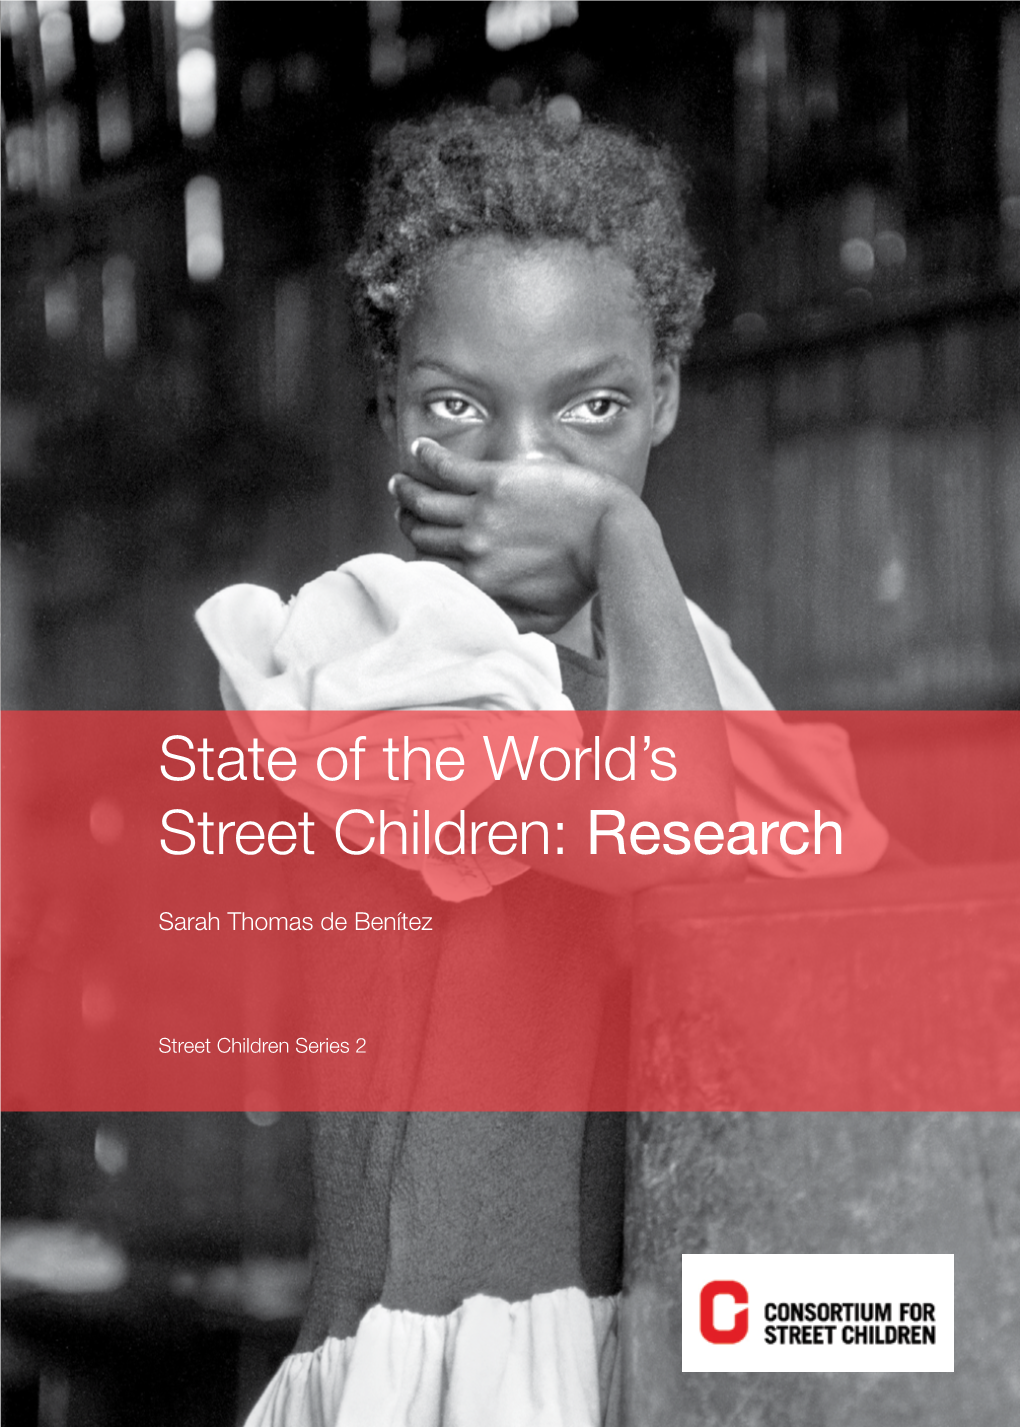 State of the World's Street Children: Research